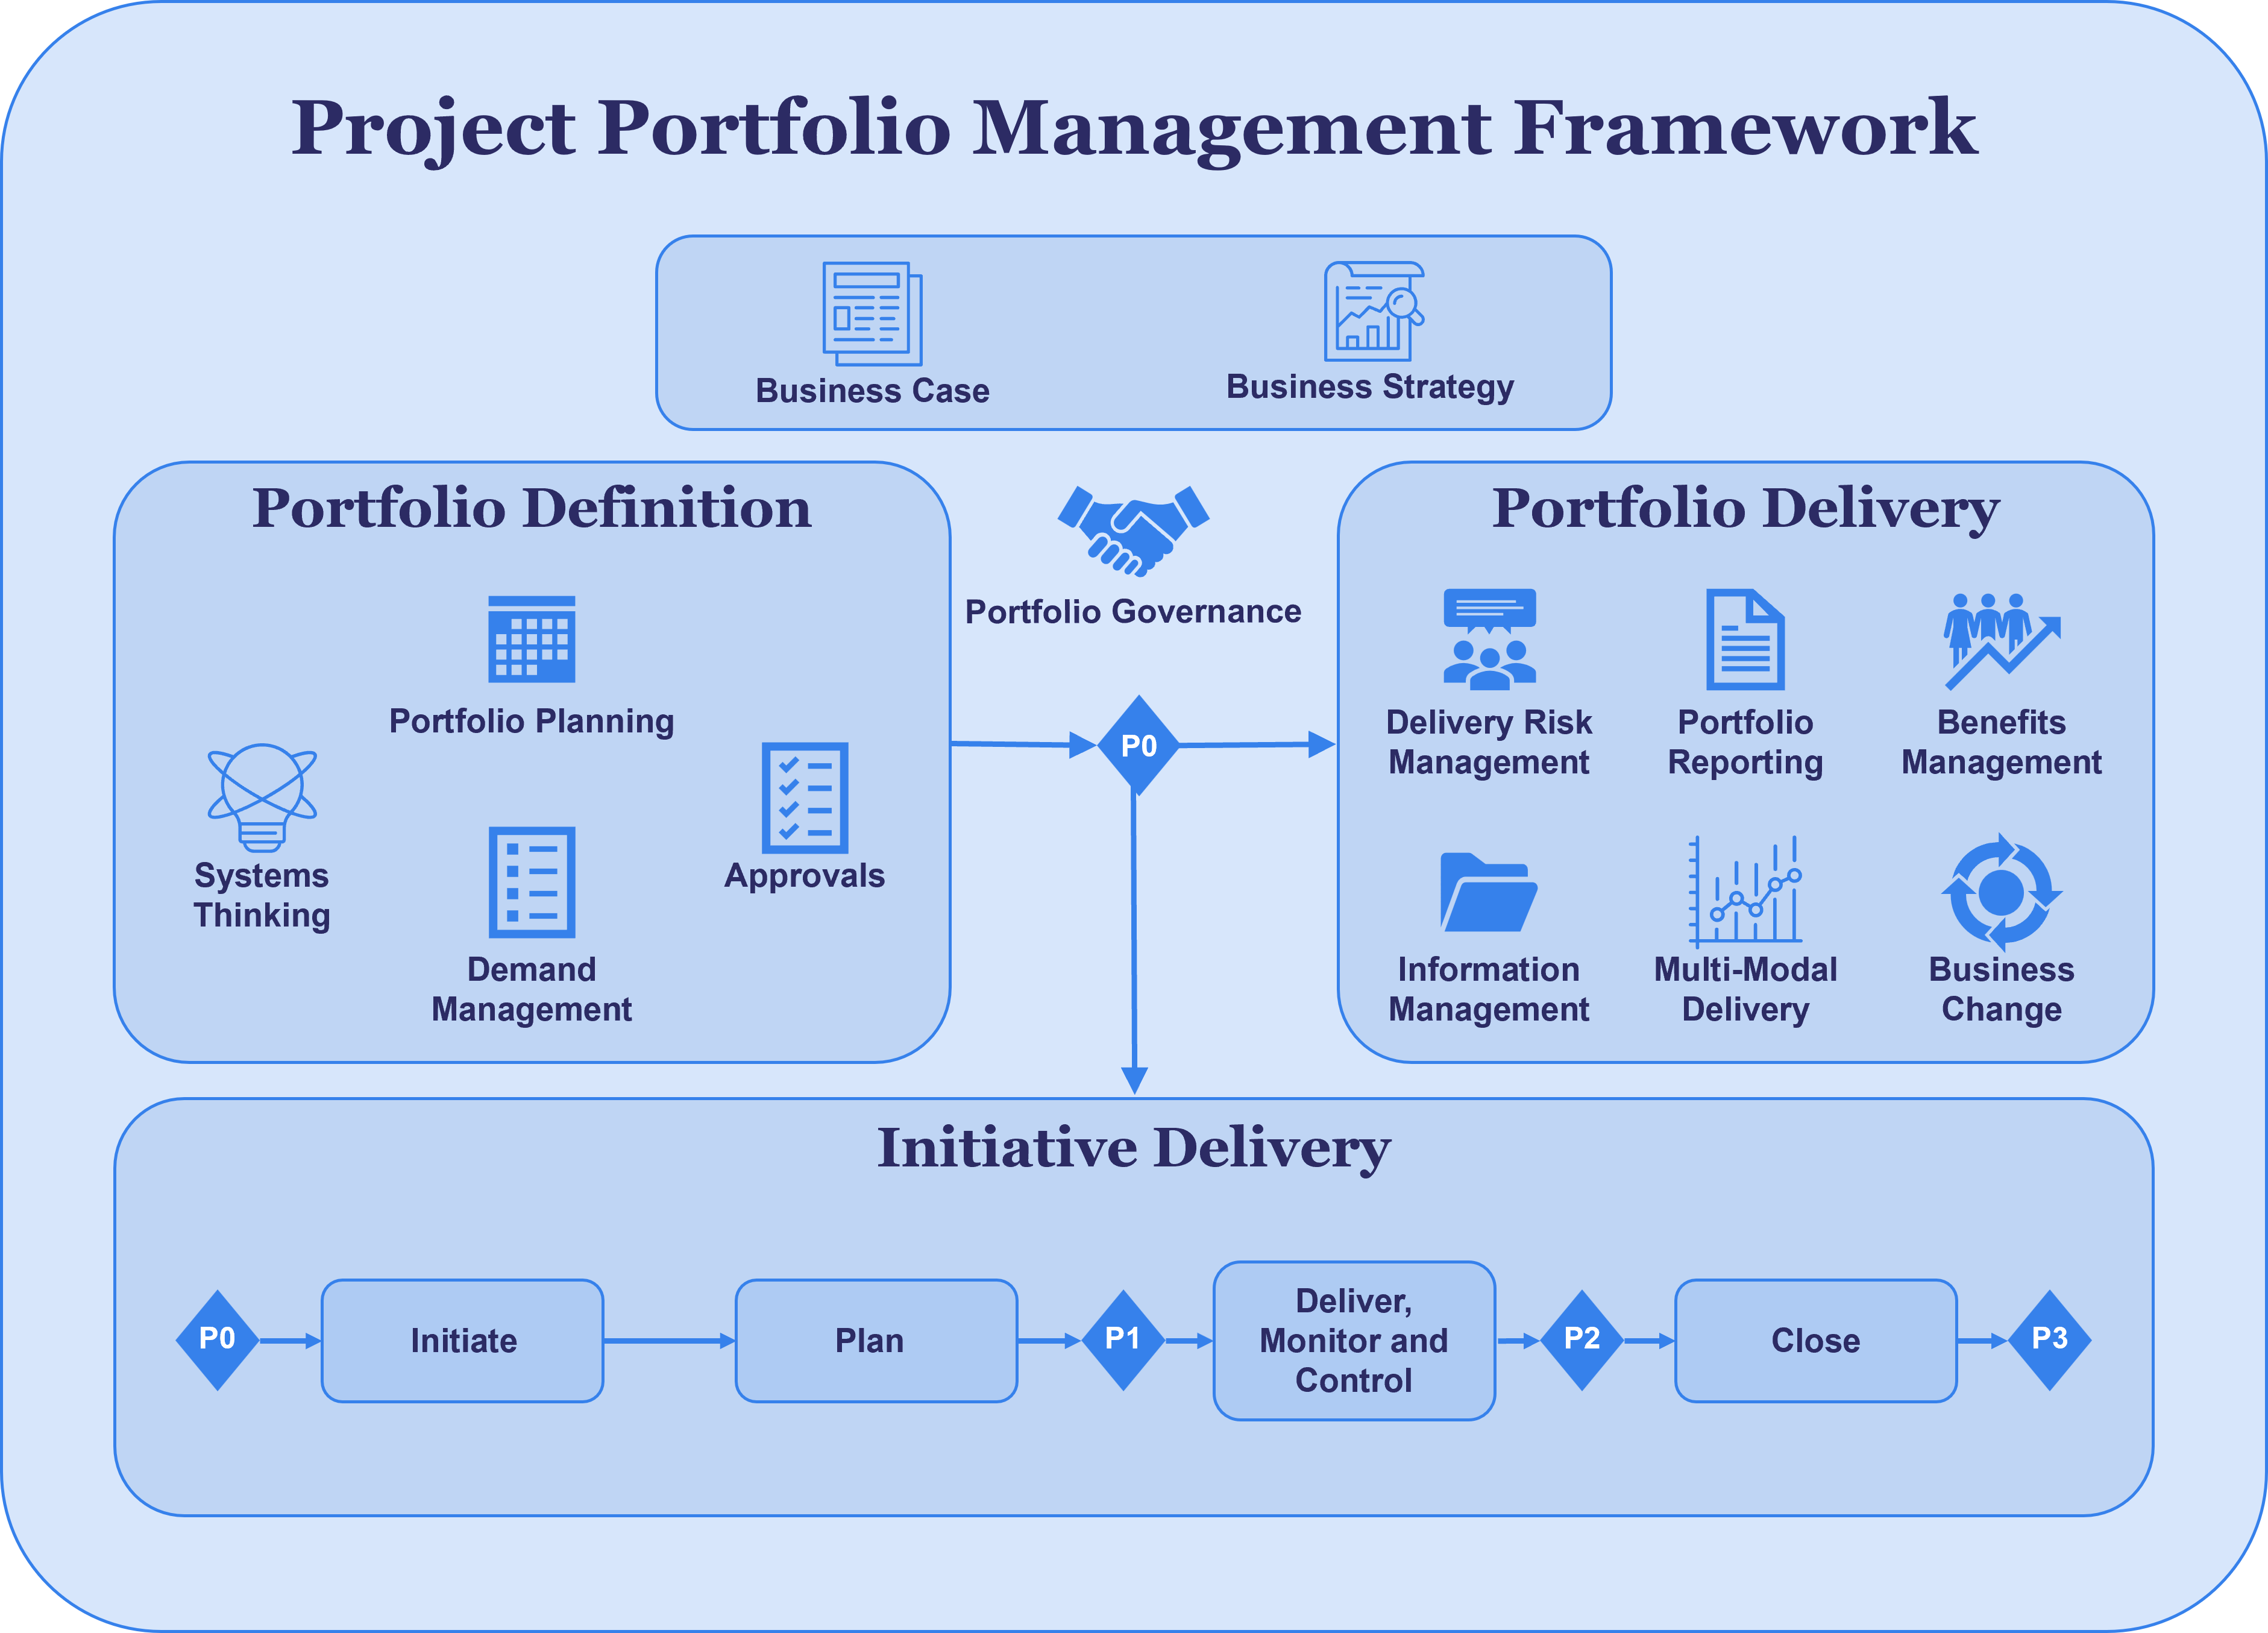 Project Portfolio Management Framework defined by three components.